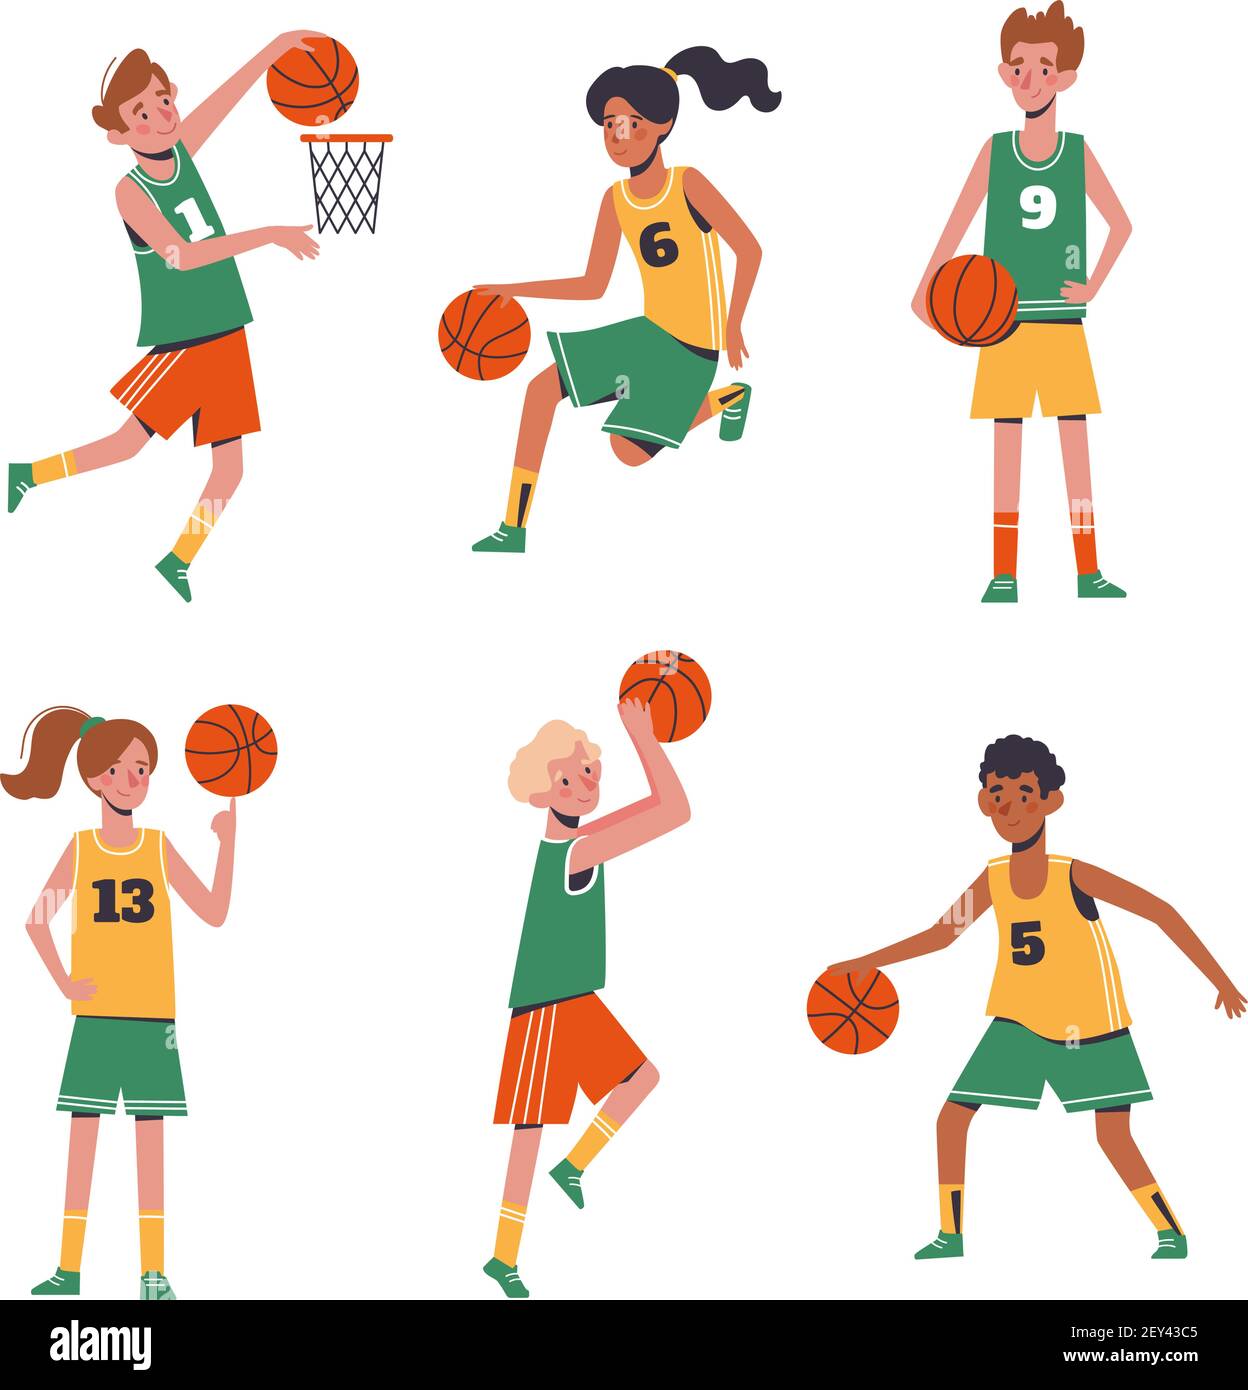 Childrens sports basketball. Flat design concept with funny kids playing ball. Vector illustration of boys and girls, set isolated on white background Stock Vector